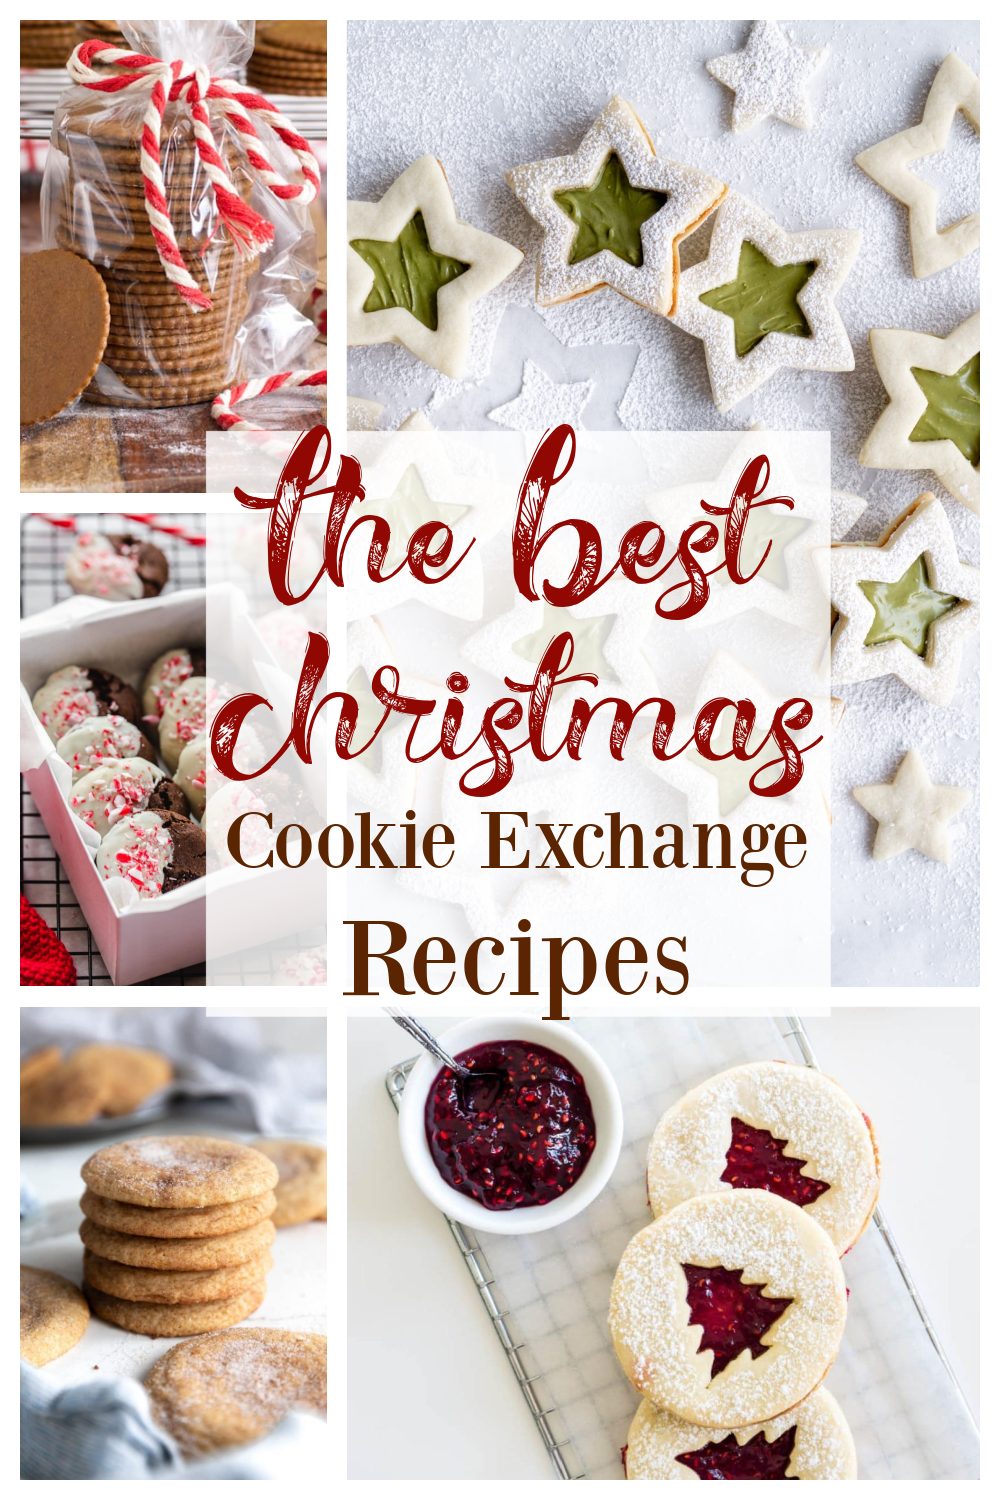 If you're looking for holiday baking inspiration, I've got you covered with this mouthwatering round-up of the best Christmas cookie exchange recipes and tasty ideas for throwing an epic holiday party! via @Ameessavorydish